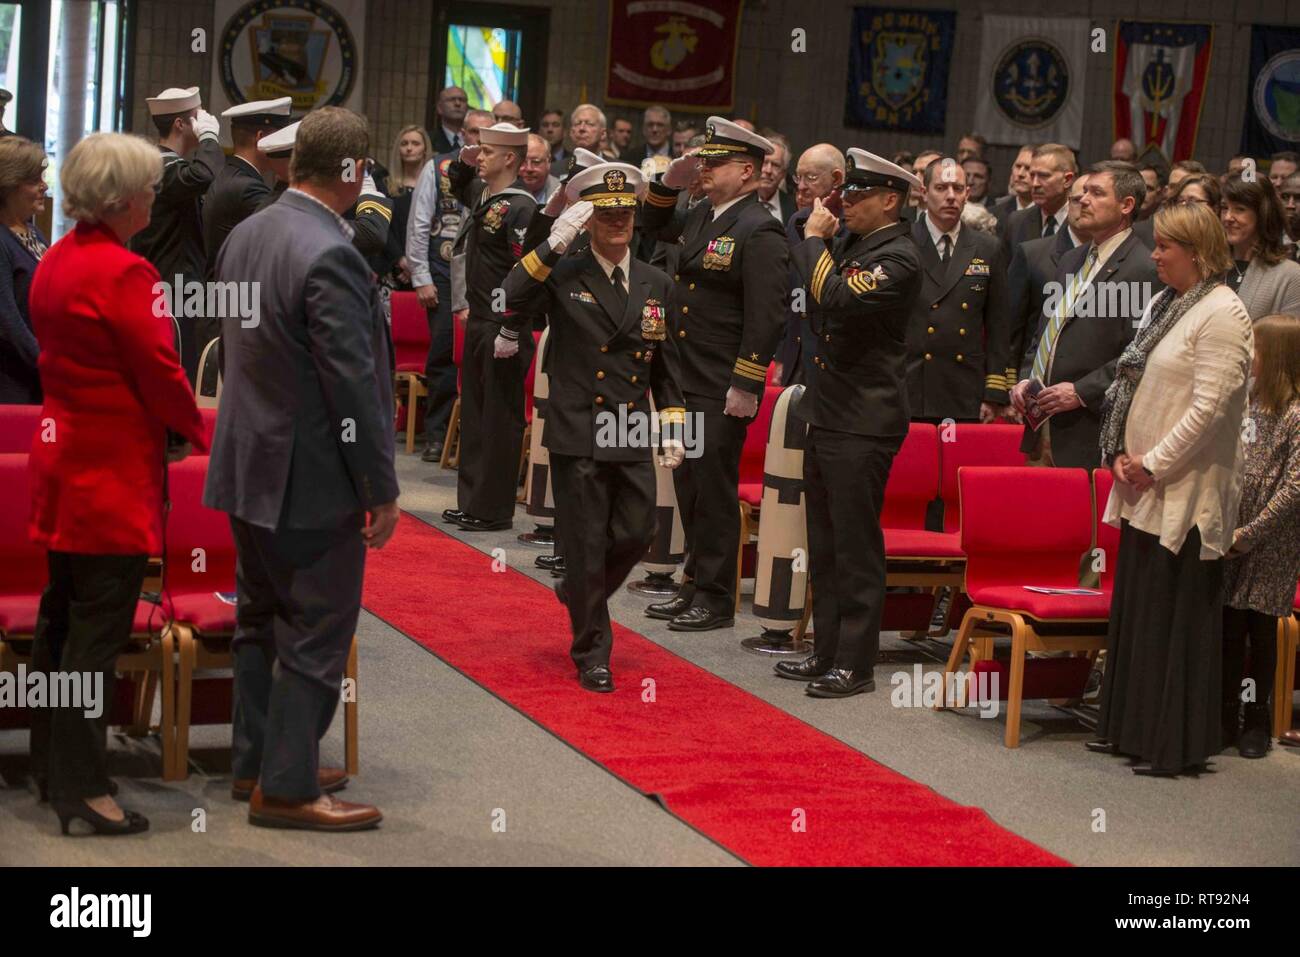 BANGOR, Wash. (Jan. 25, 2019) Rear Adm. Douglas Perry, from Biloxi, Mississippi, receives honors from the sideboys as the official party arrives during a change of command ceremony for Submarine Group 9.  Rear Adm. Blake Converse, from Montoursville, Pennsylvania, was relieved by Perry during the ceremony held at the Bangor Chapel. Stock Photo